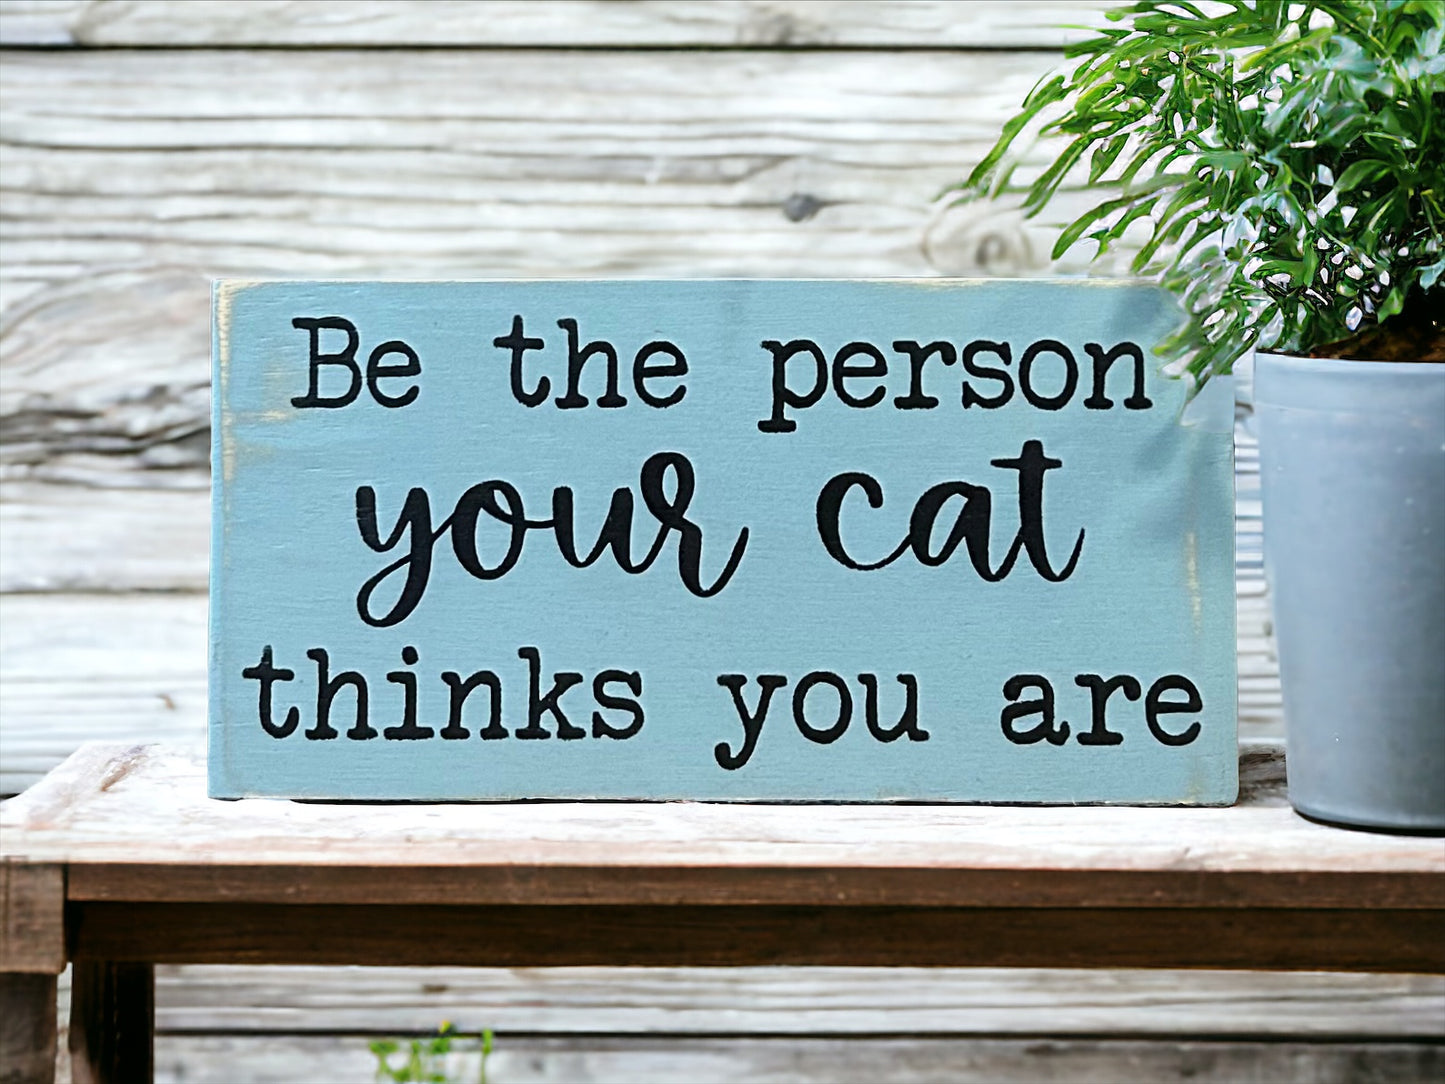 "Be the person your cat thinks you are" wood sign